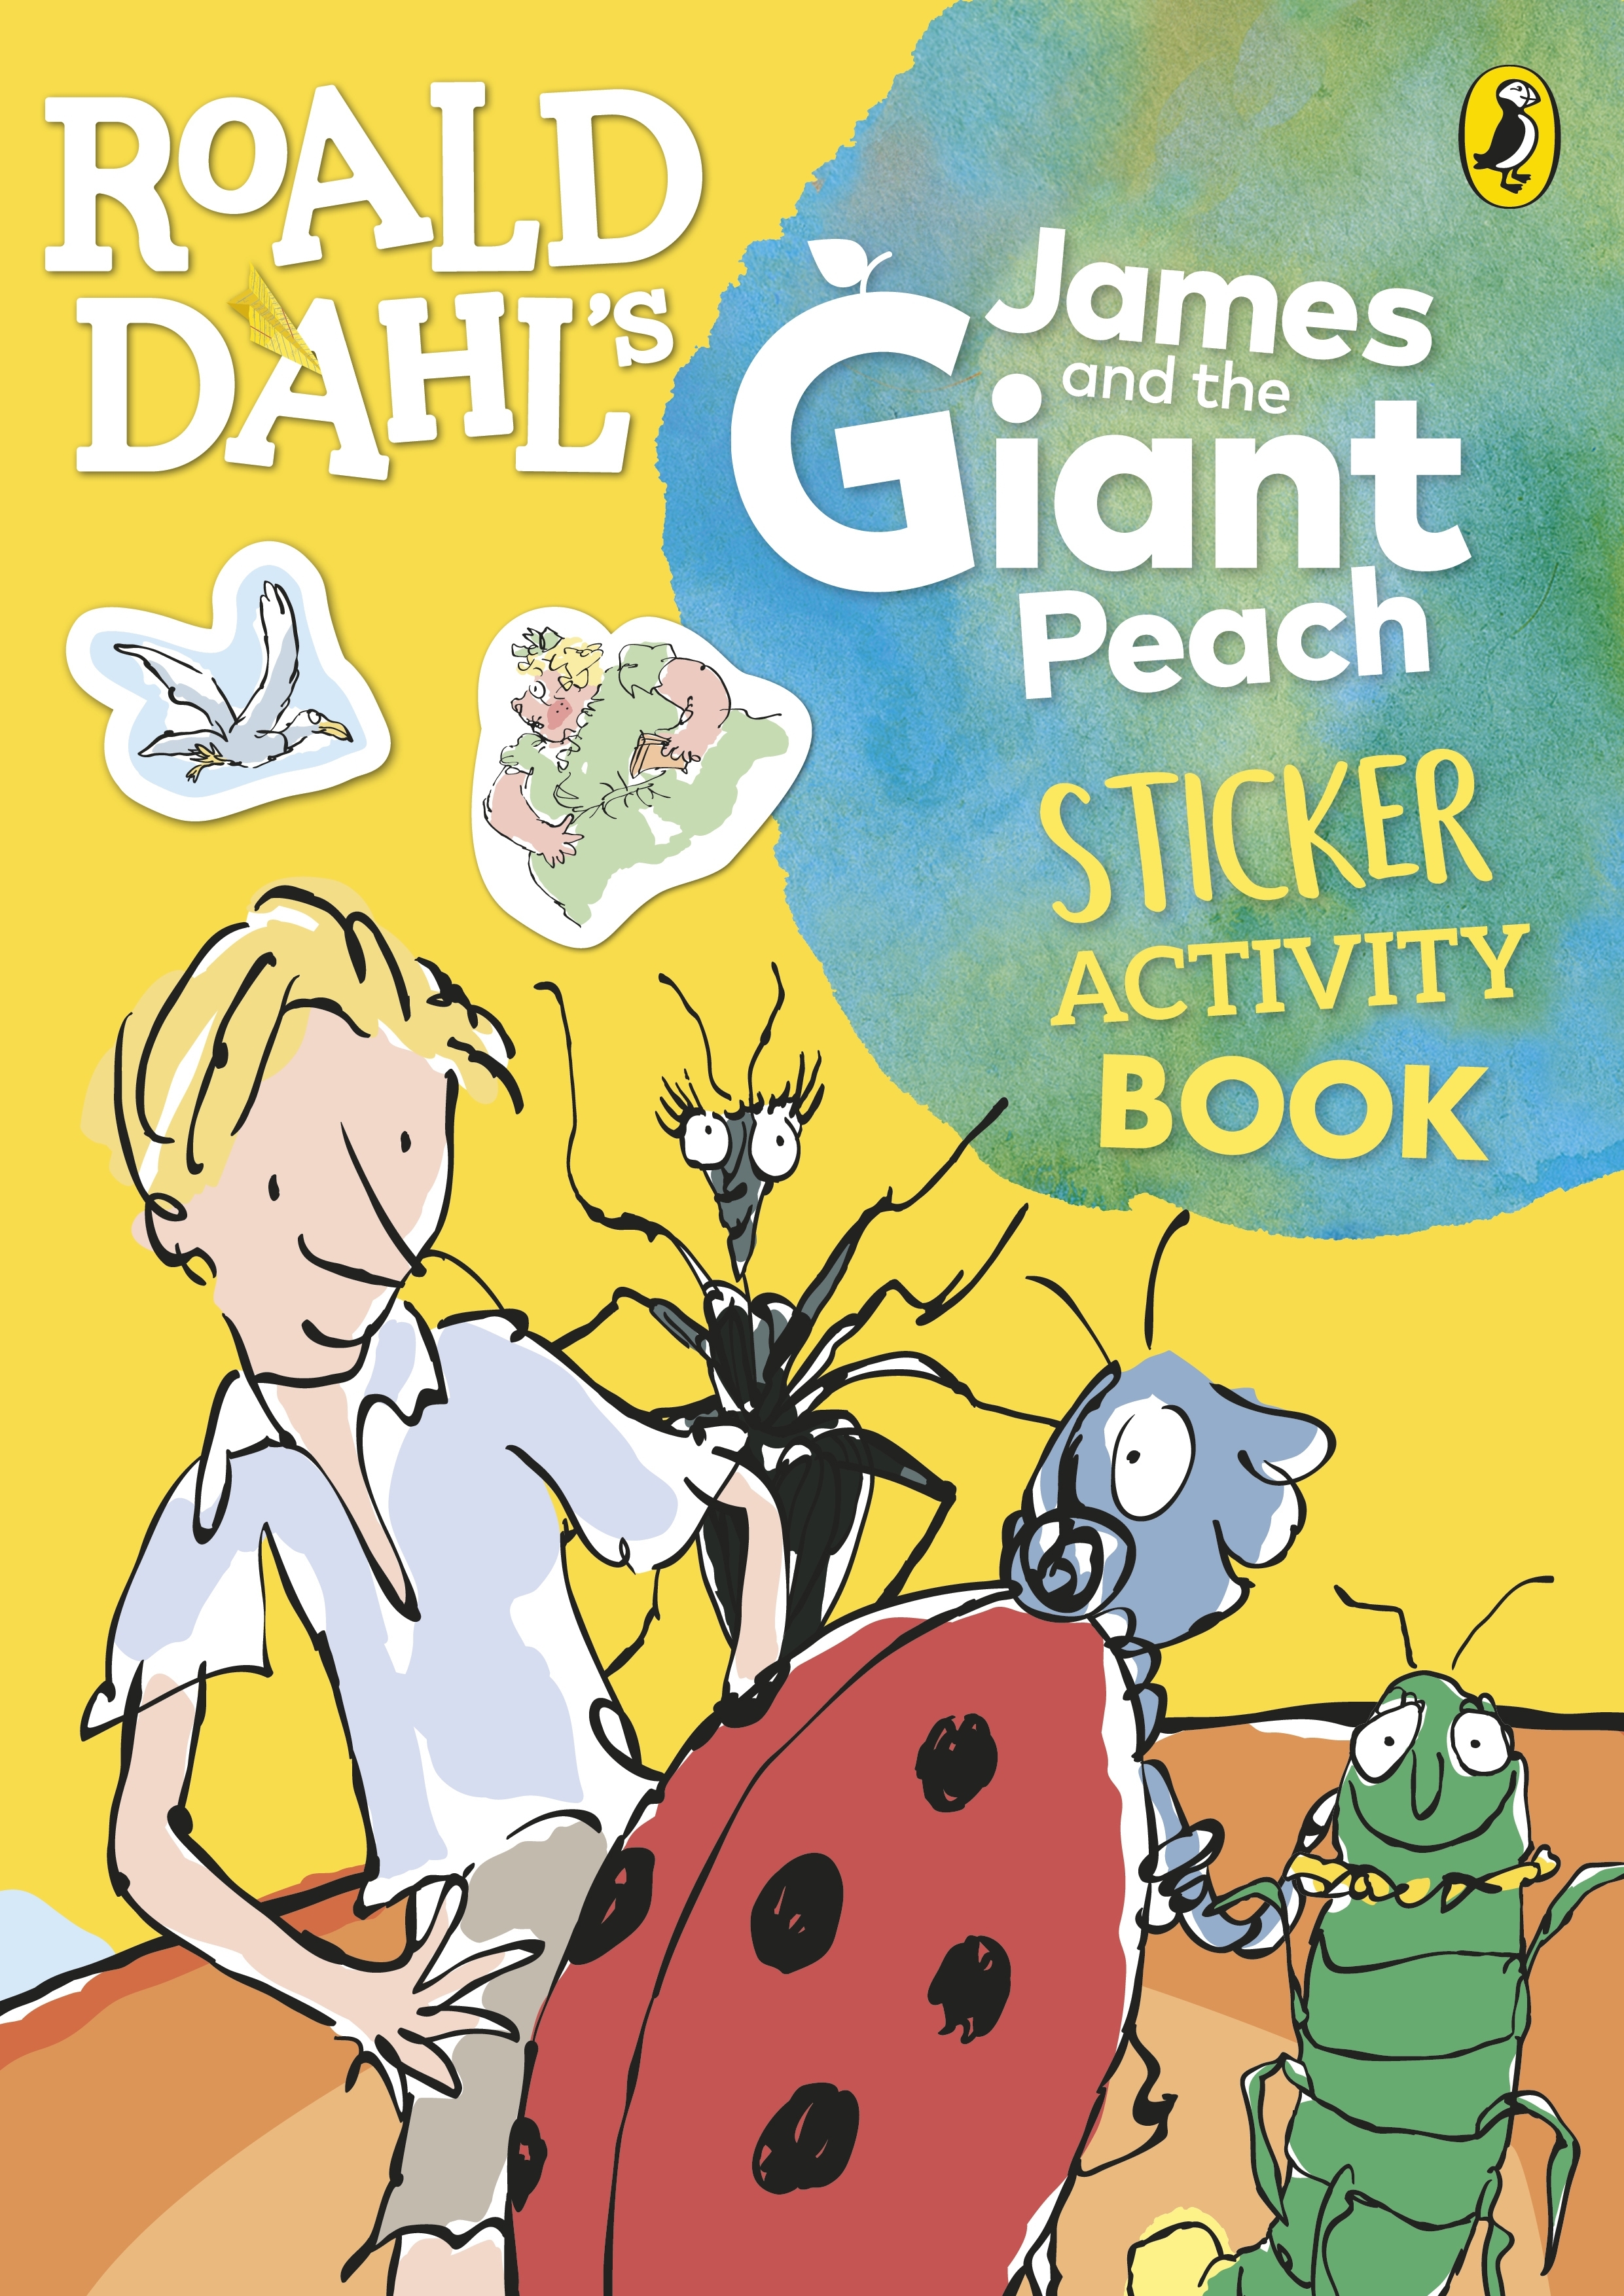 roald-dahl-s-james-and-the-giant-peach-sticker-activity-book-by-roald